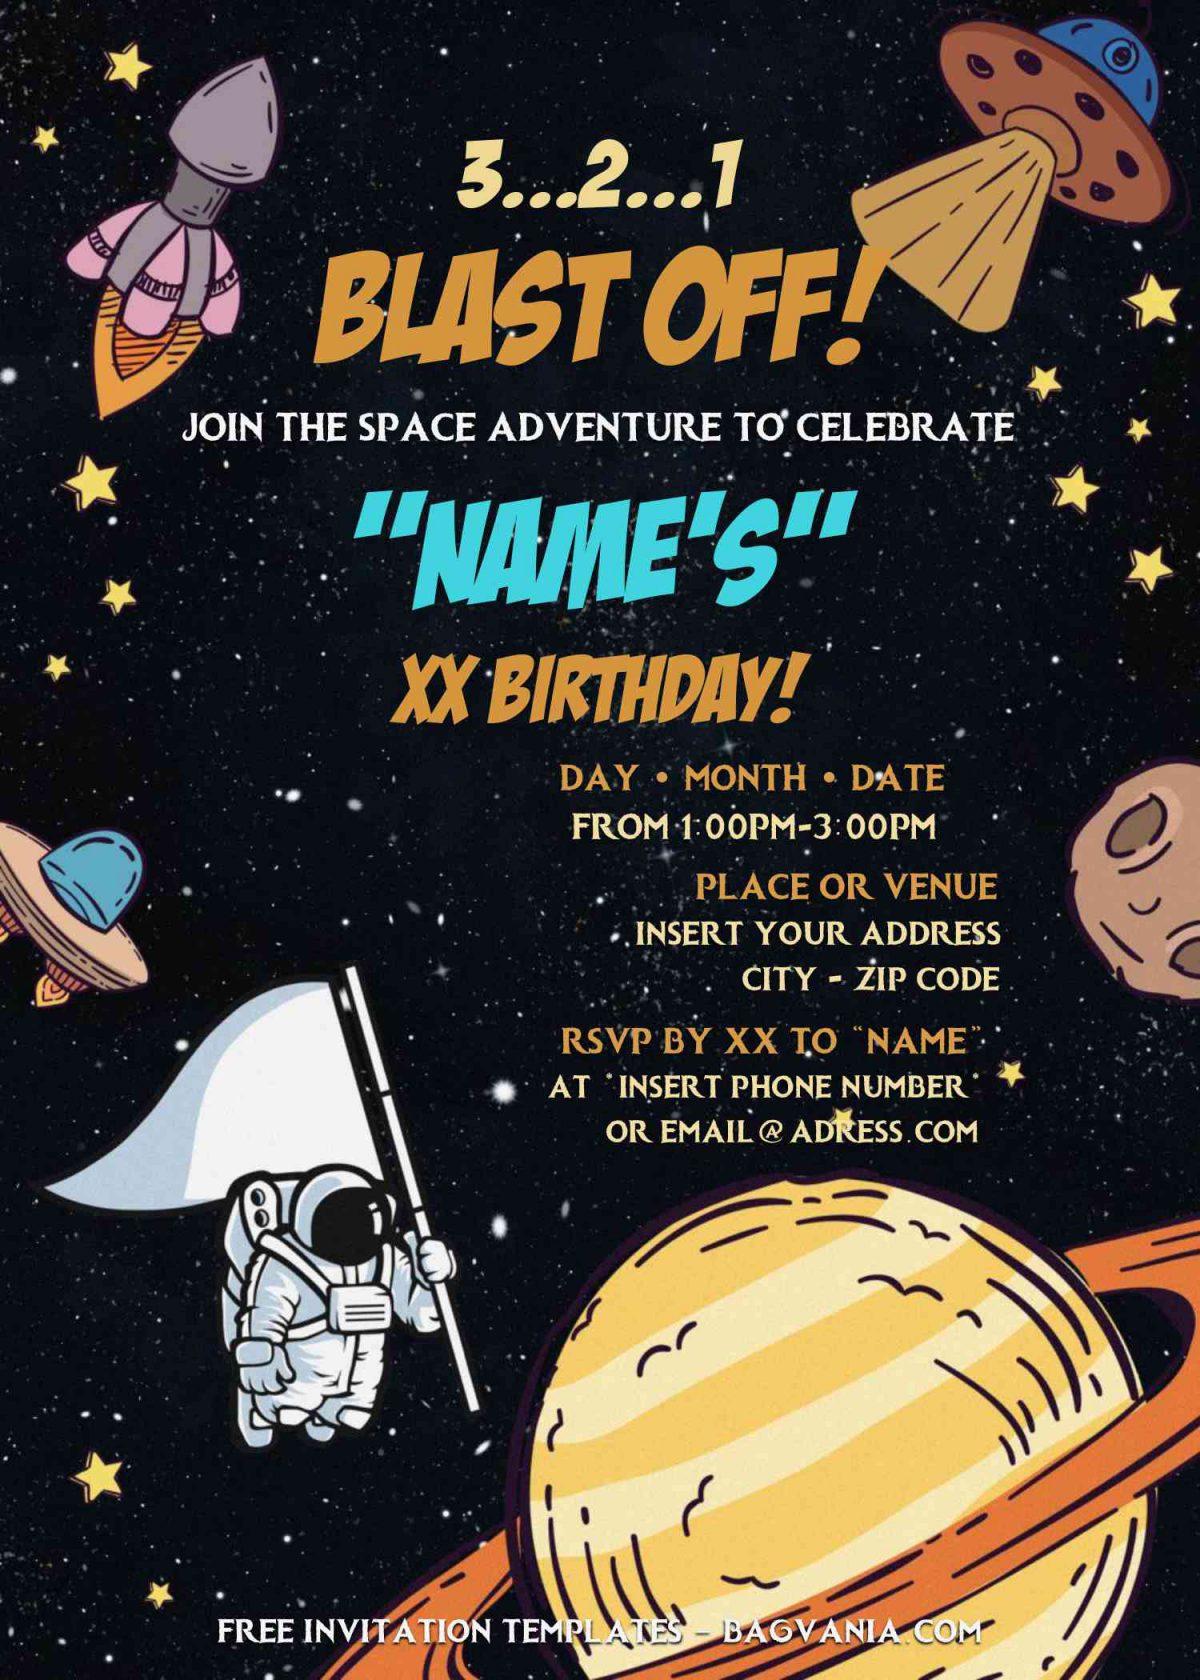 Free Astronaut Birthday Invitation Templates For Word and has rocket and ufo